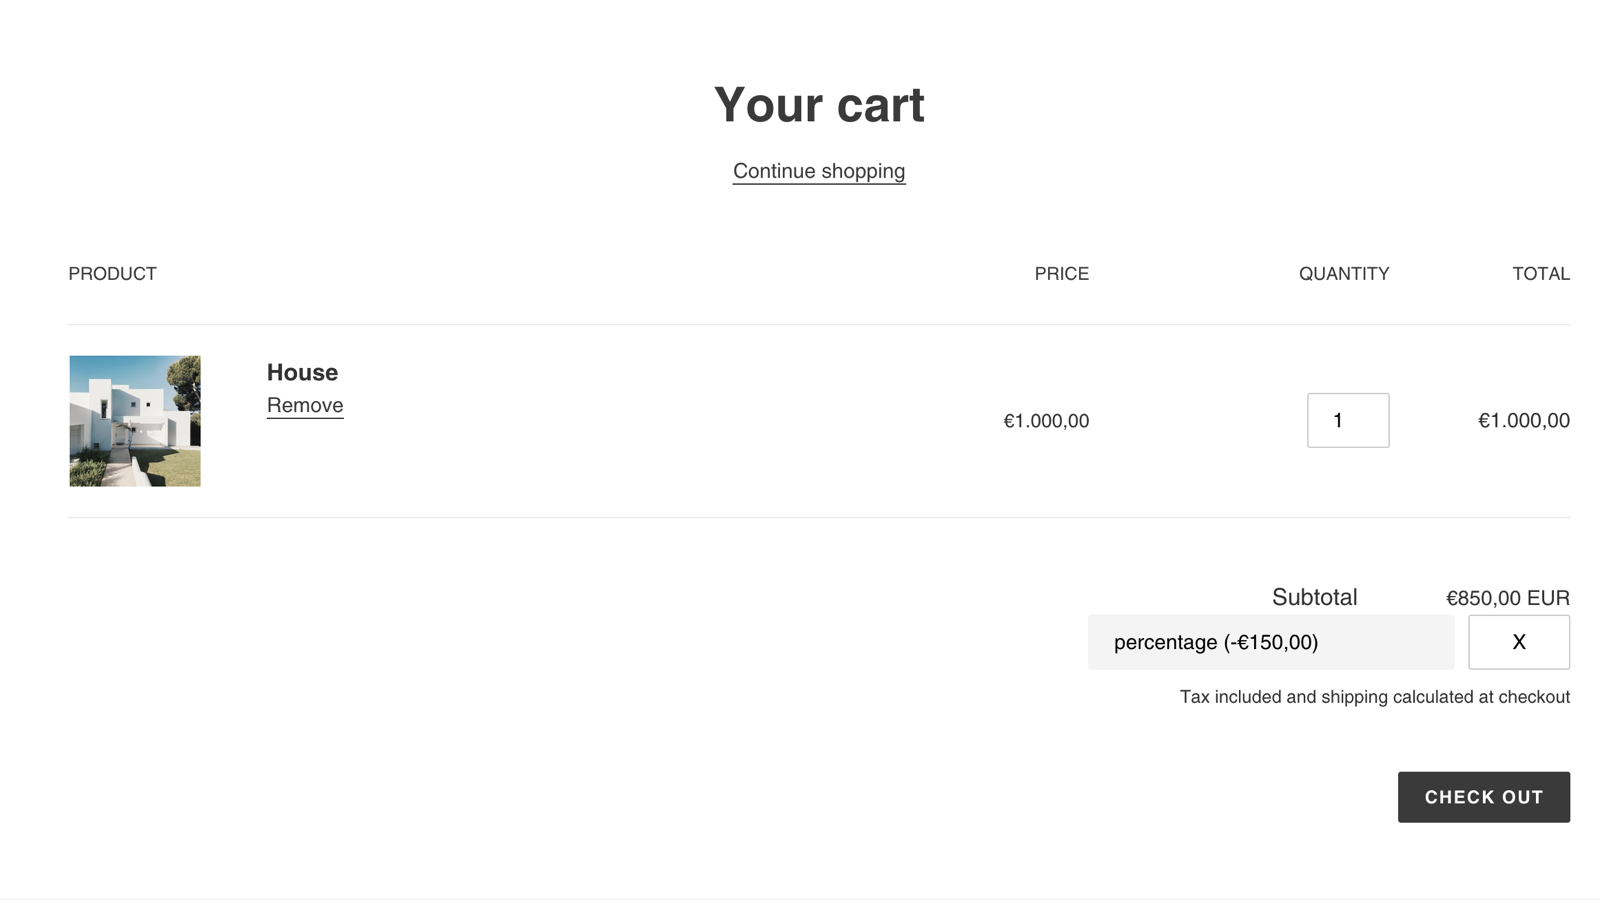 Discount in cart applied with subtotal changed to new price